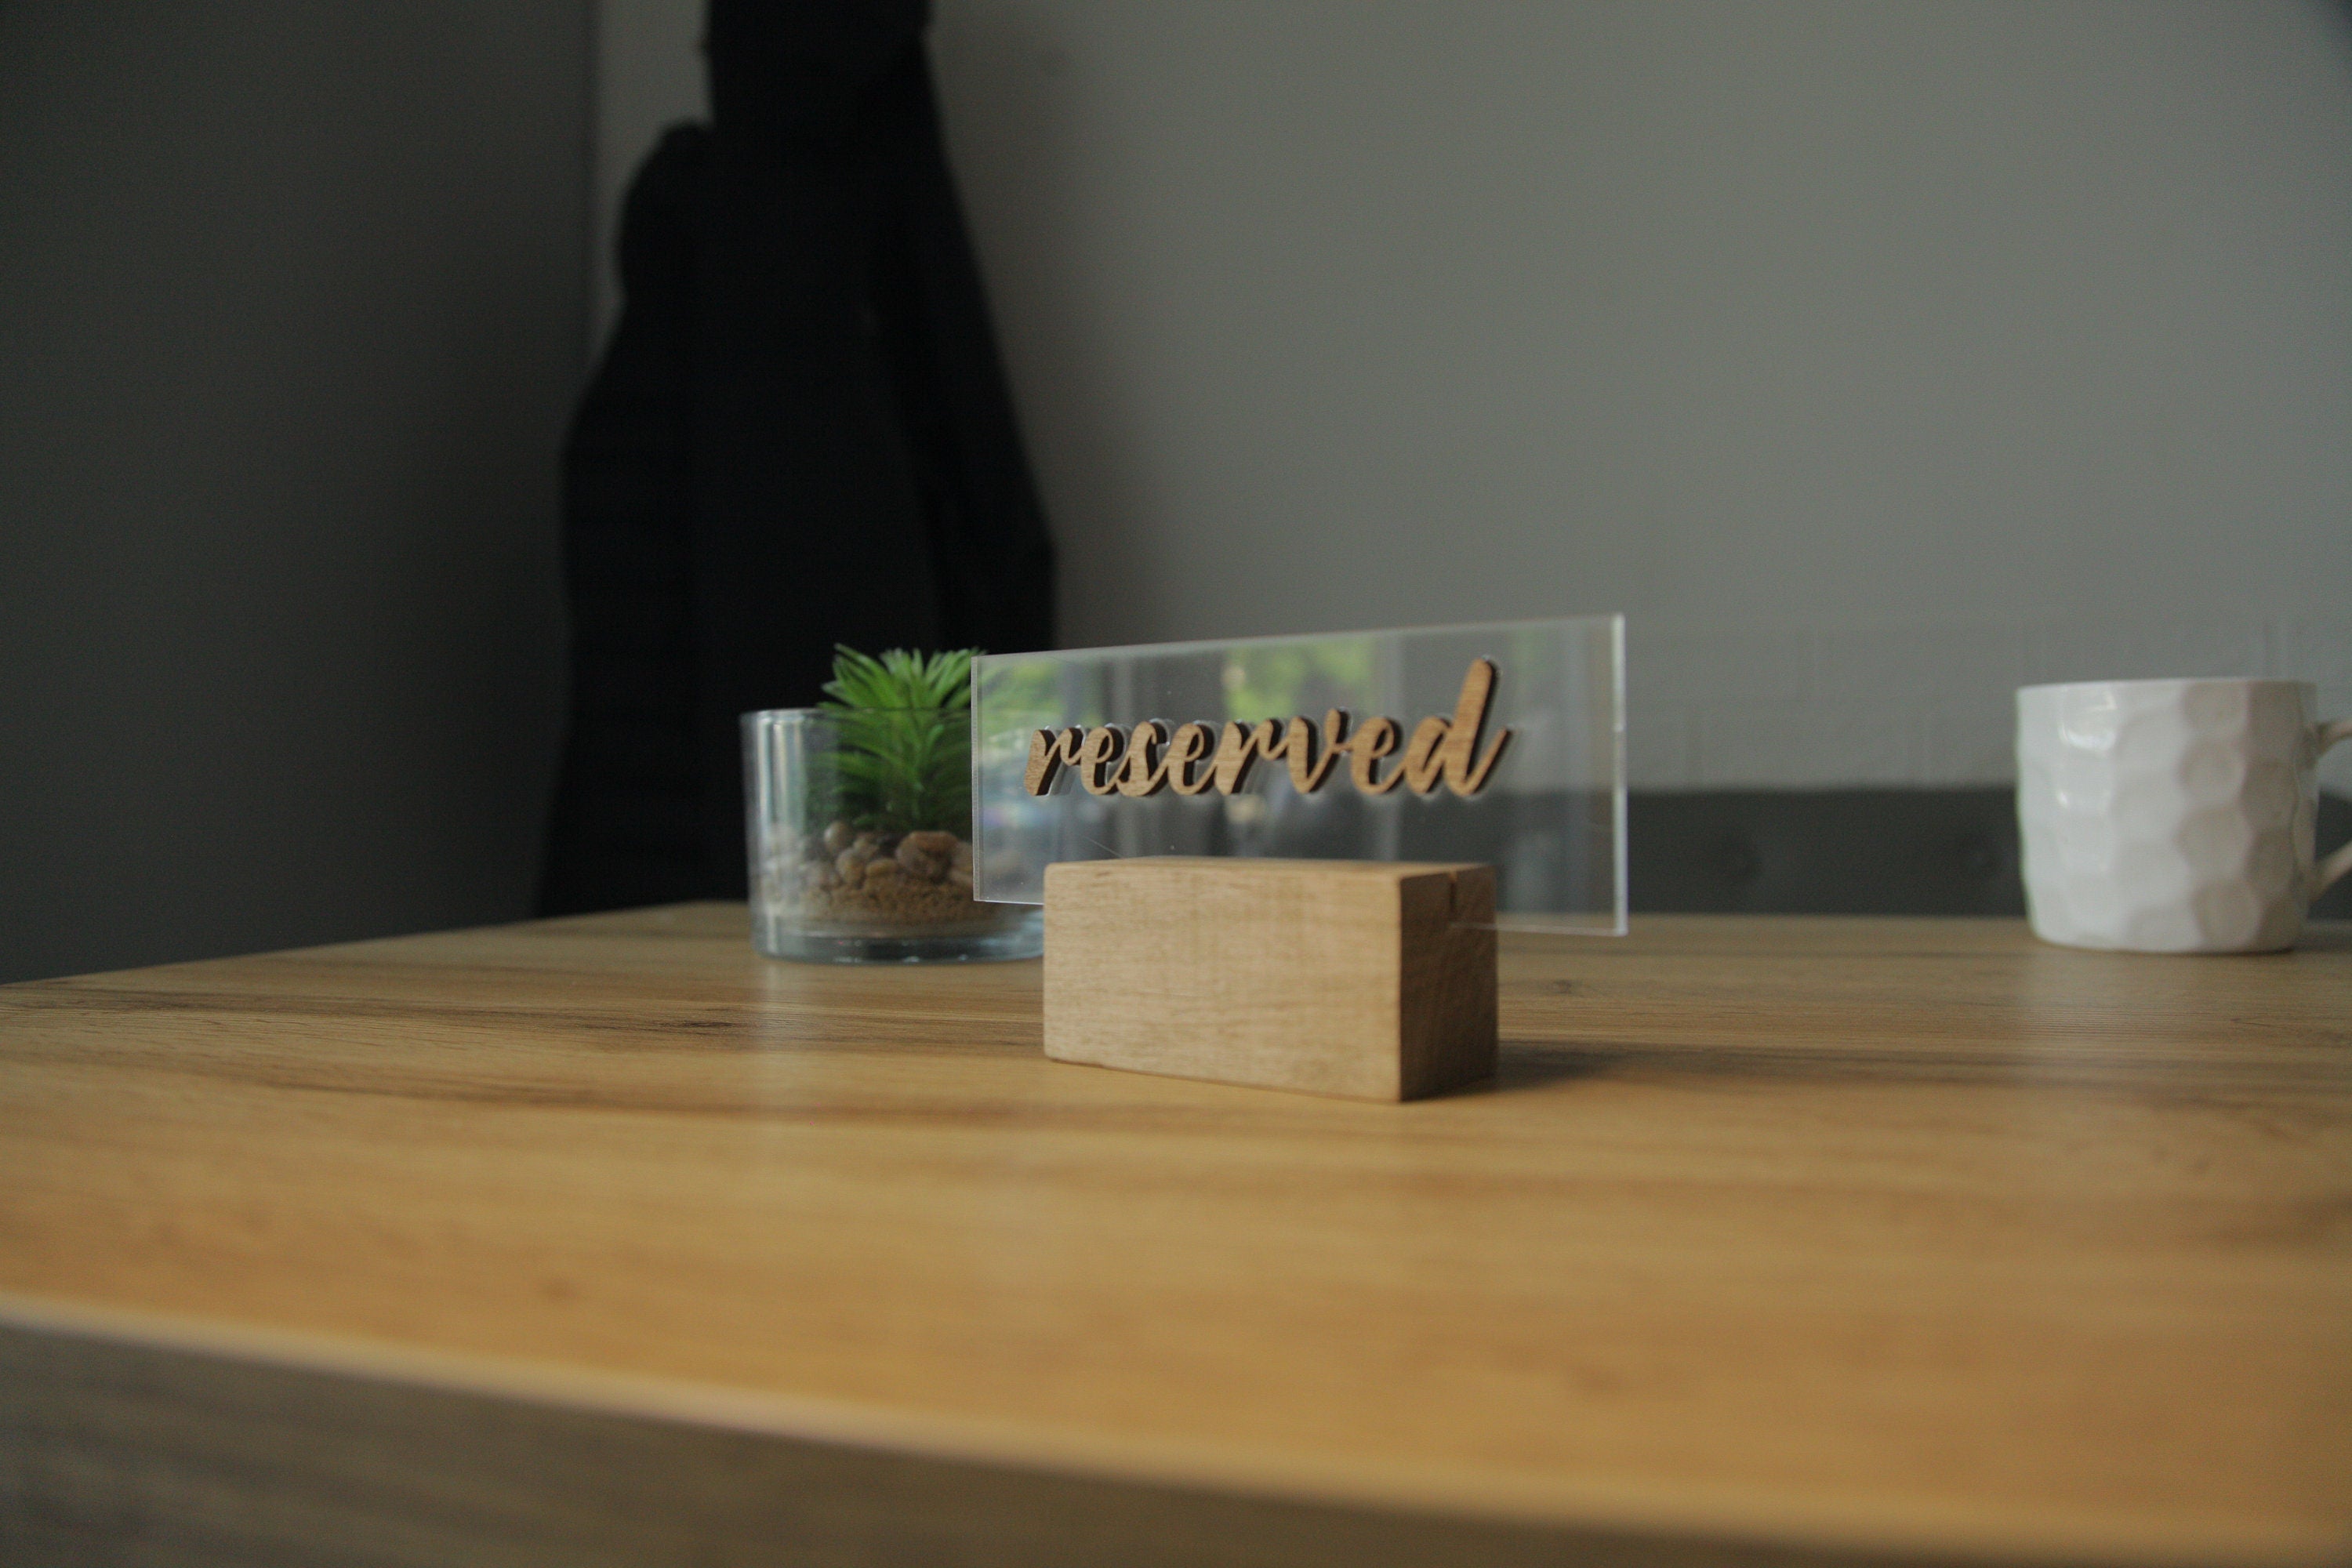 The acrylic sign or why raise the quality of your place?